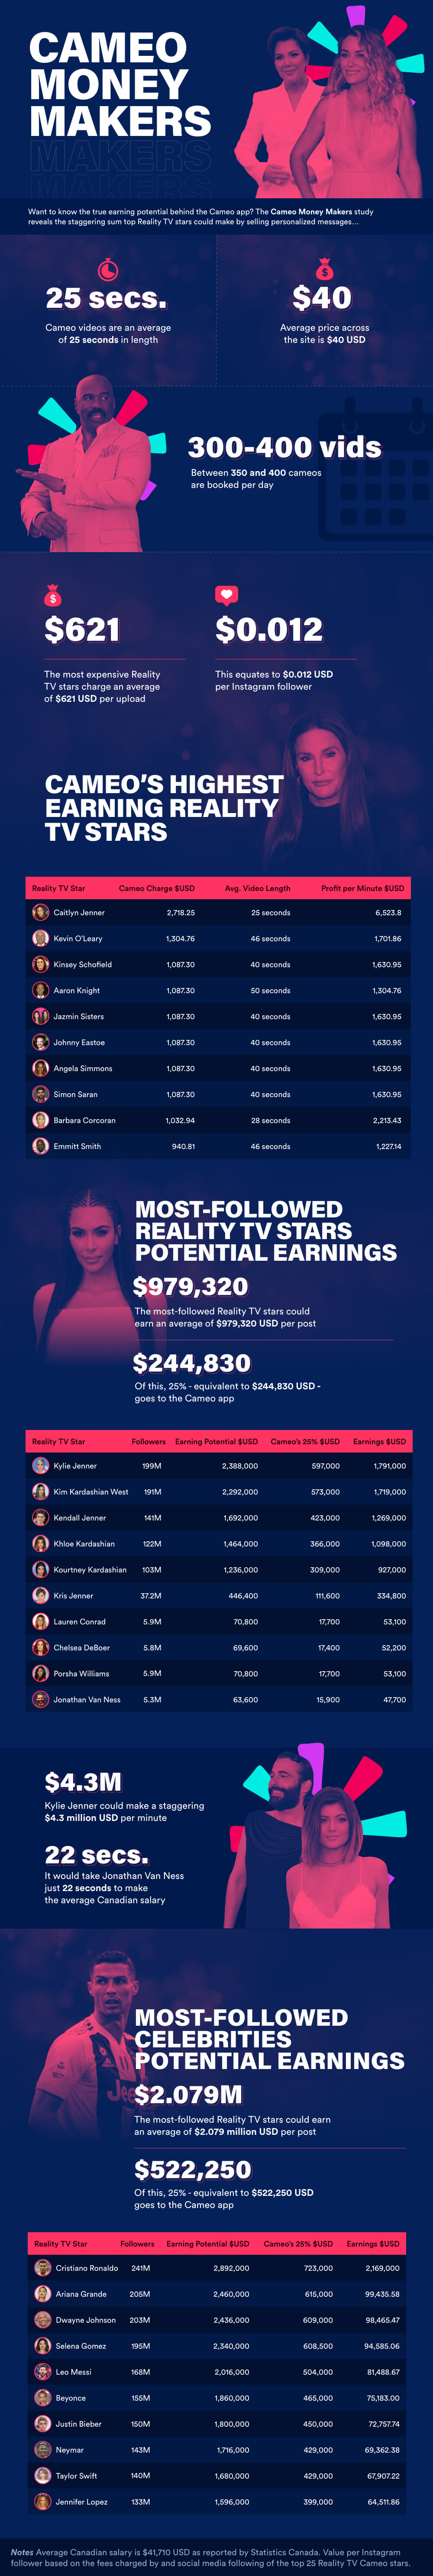 Cameo money makers infographic